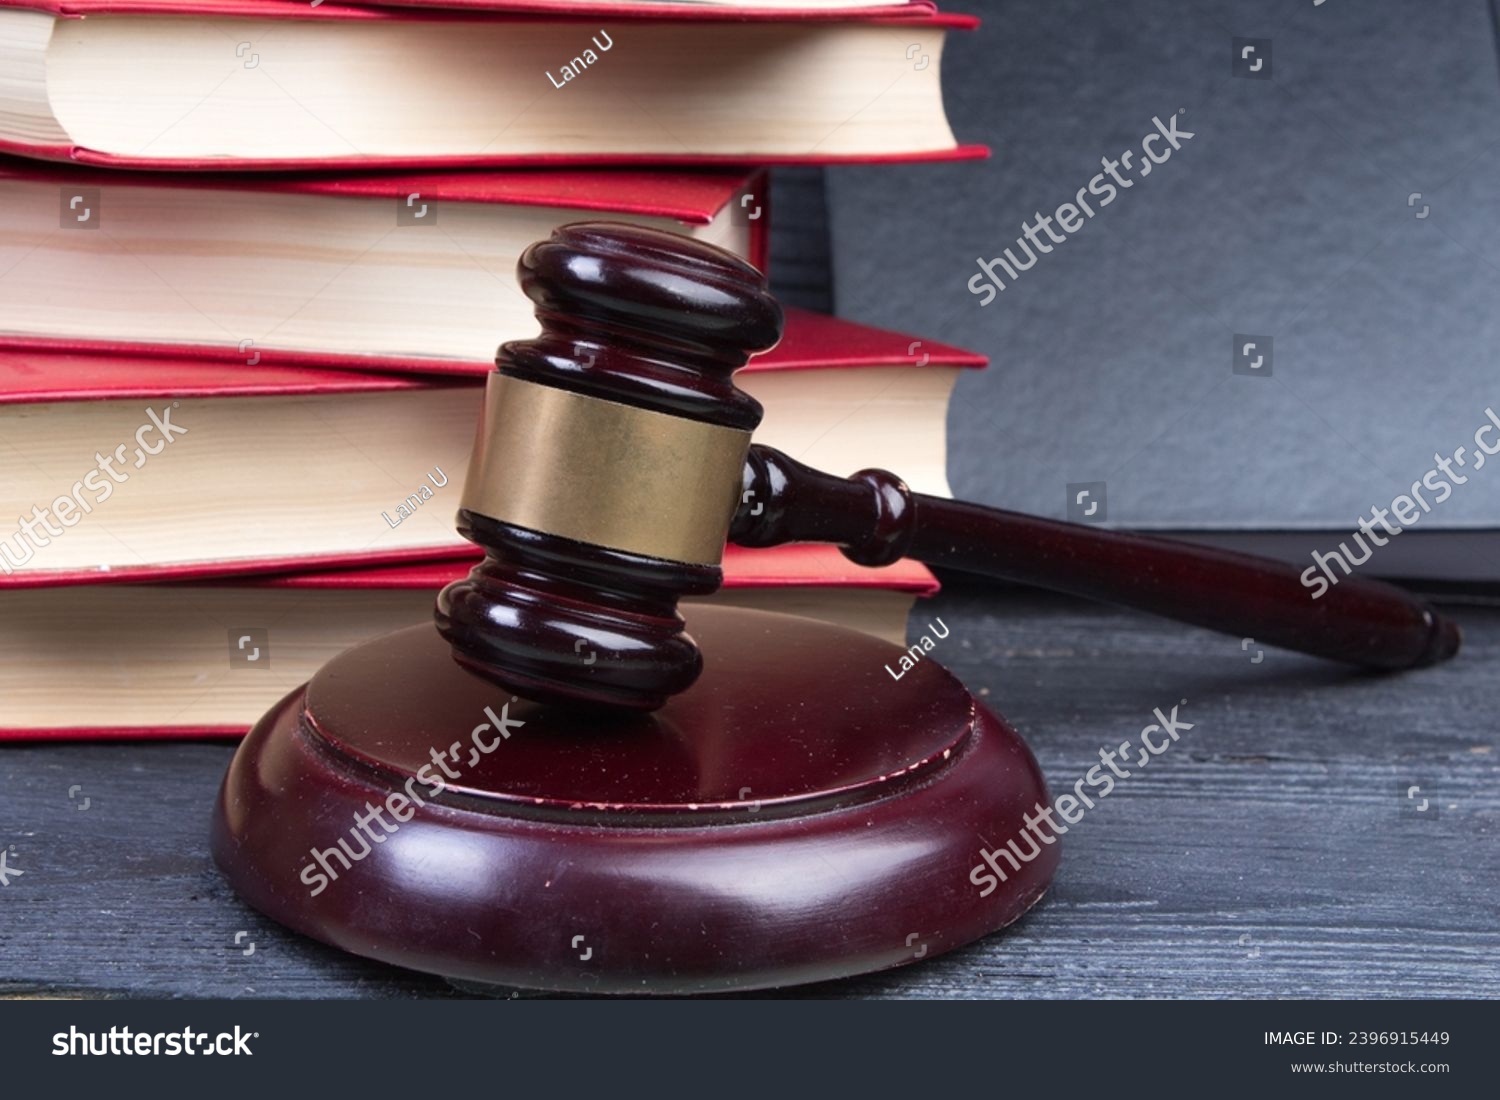 Law concept - Open law book with a wooden judges gavel on table in a courtroom or law enforcement office on blue background. Copy space for text #2396915449